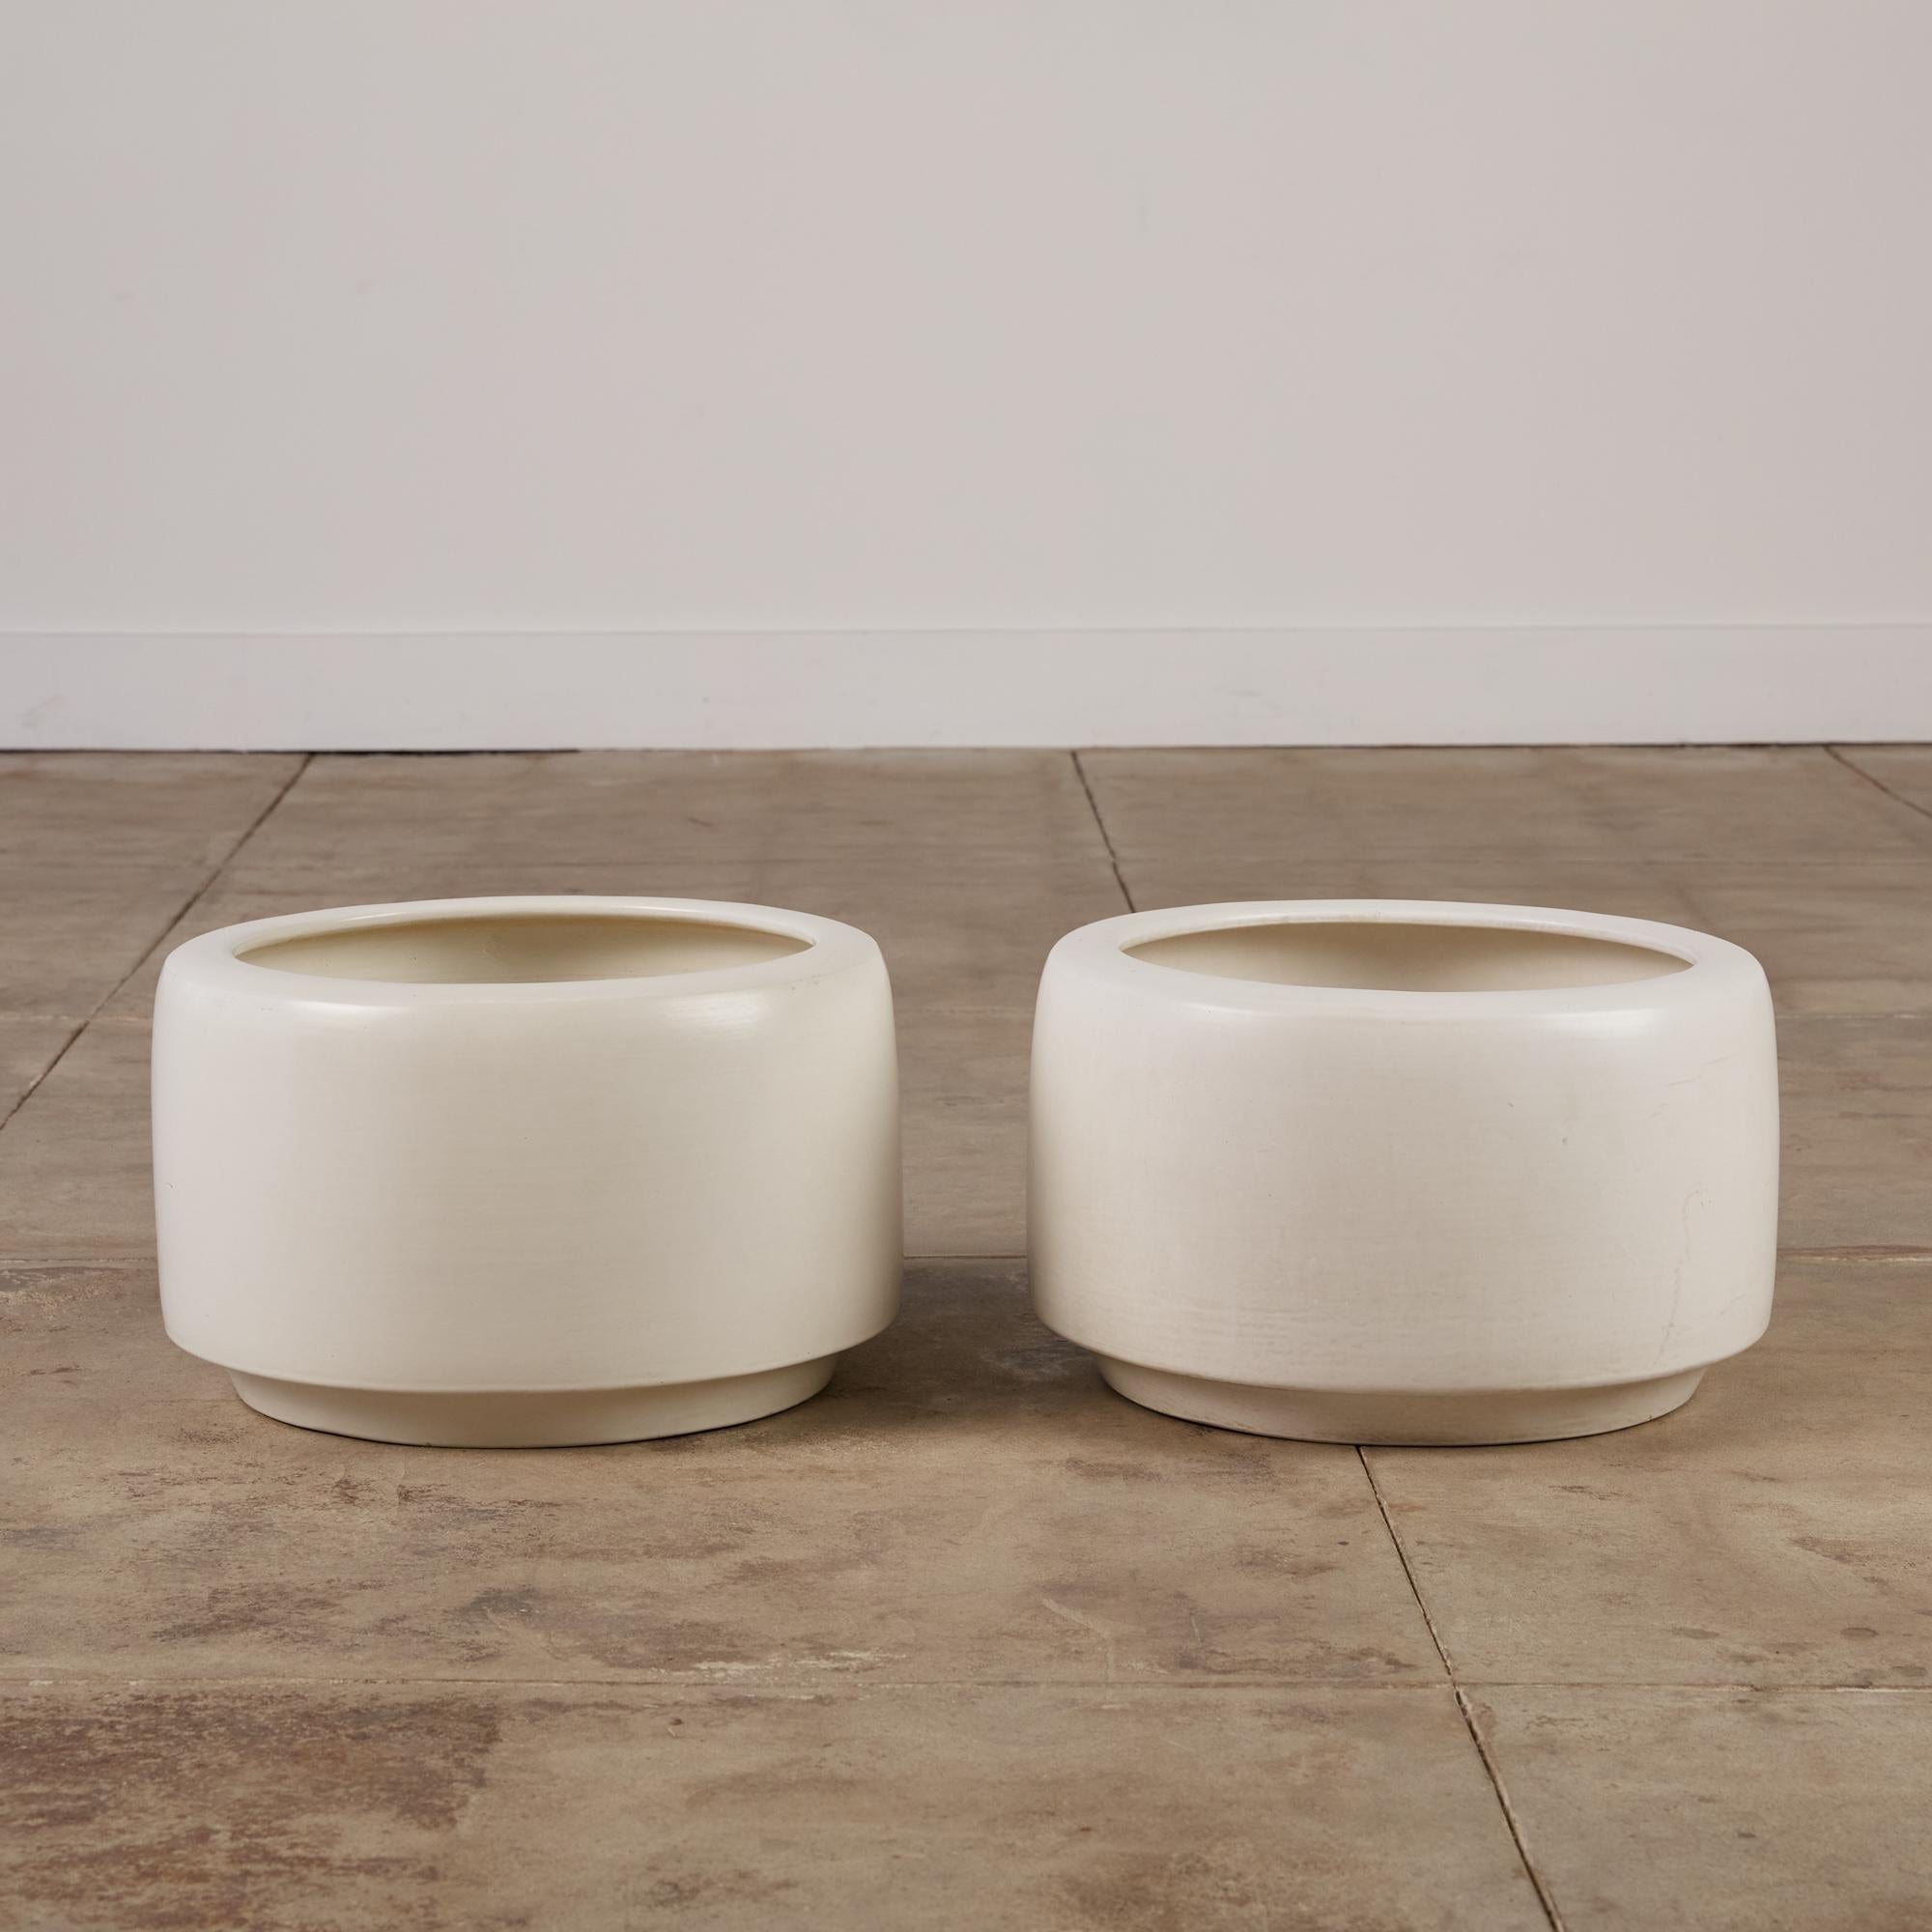 American White-Glazed CP-17 Tire Planter by John Follis for Architectural Pottery